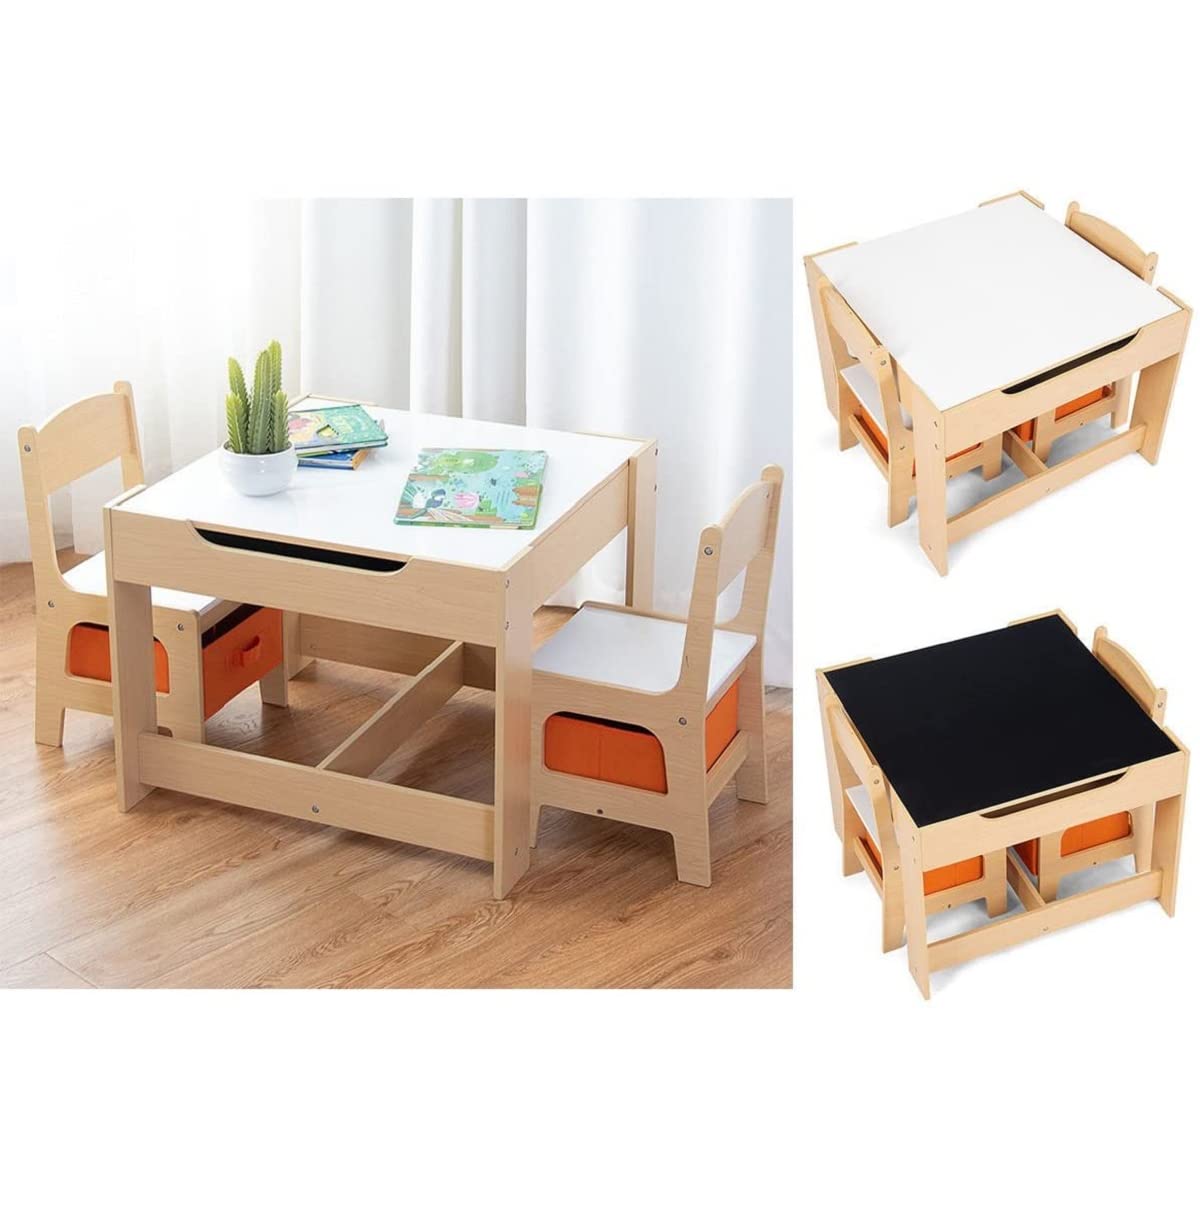 Costzon Kids Table and Chair Set, 3 in 1 Wooden Activity Table for Toddlers Arts, Crafts, Drawing, Reading, Playroom, Toddler w/ 2 in 1 Tabletop, Storage Space, Gift for Boy & Girl